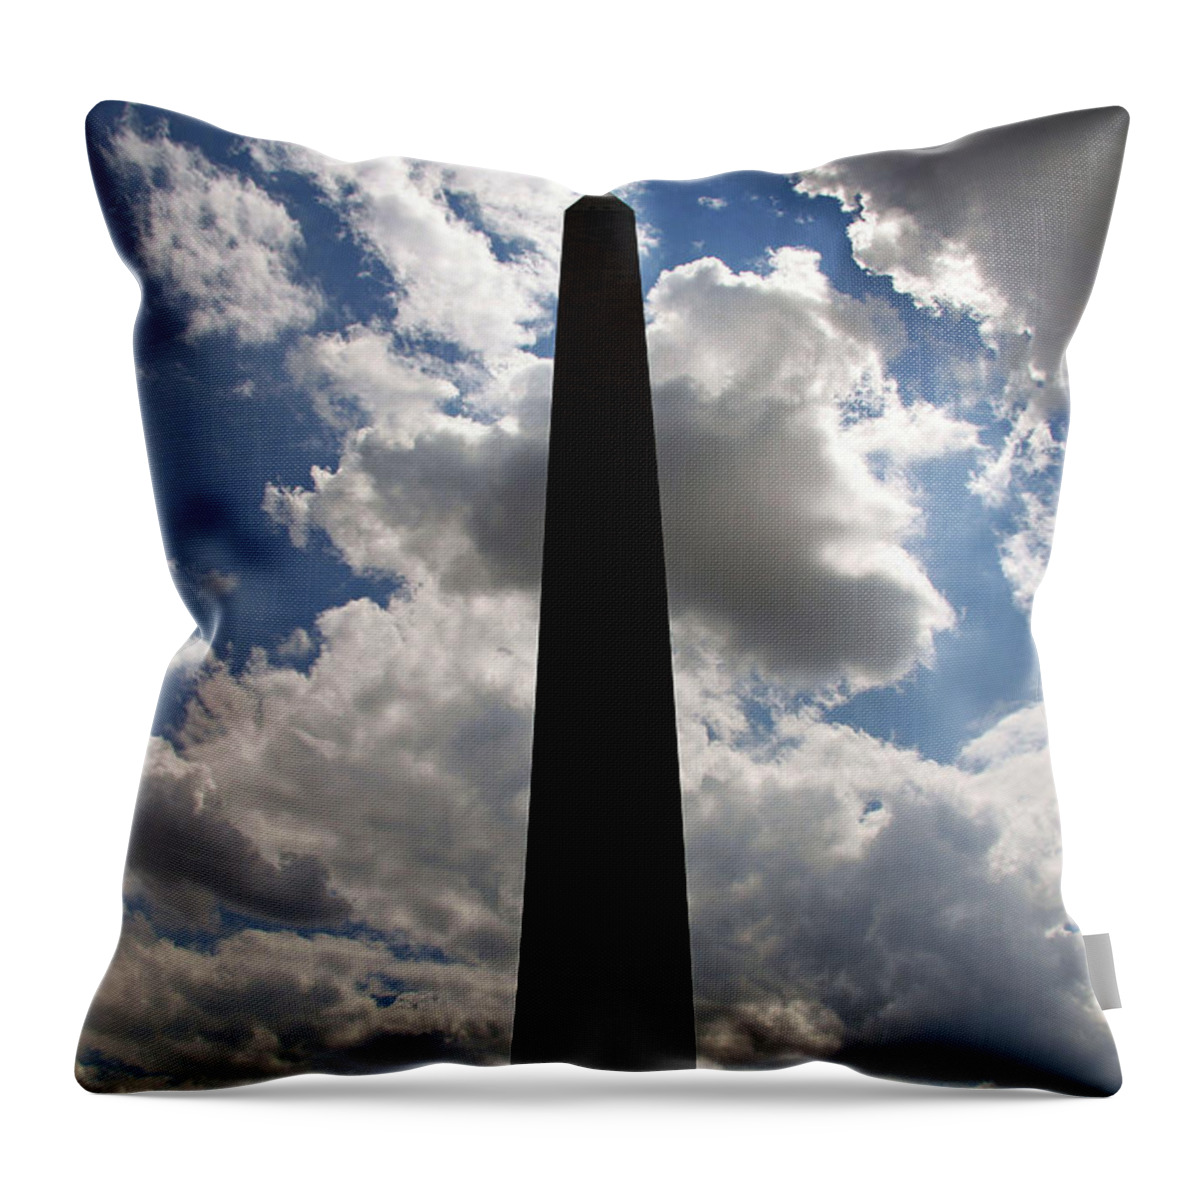 Washington Throw Pillow featuring the photograph Silhouette Of The Washington Monument by Cora Wandel